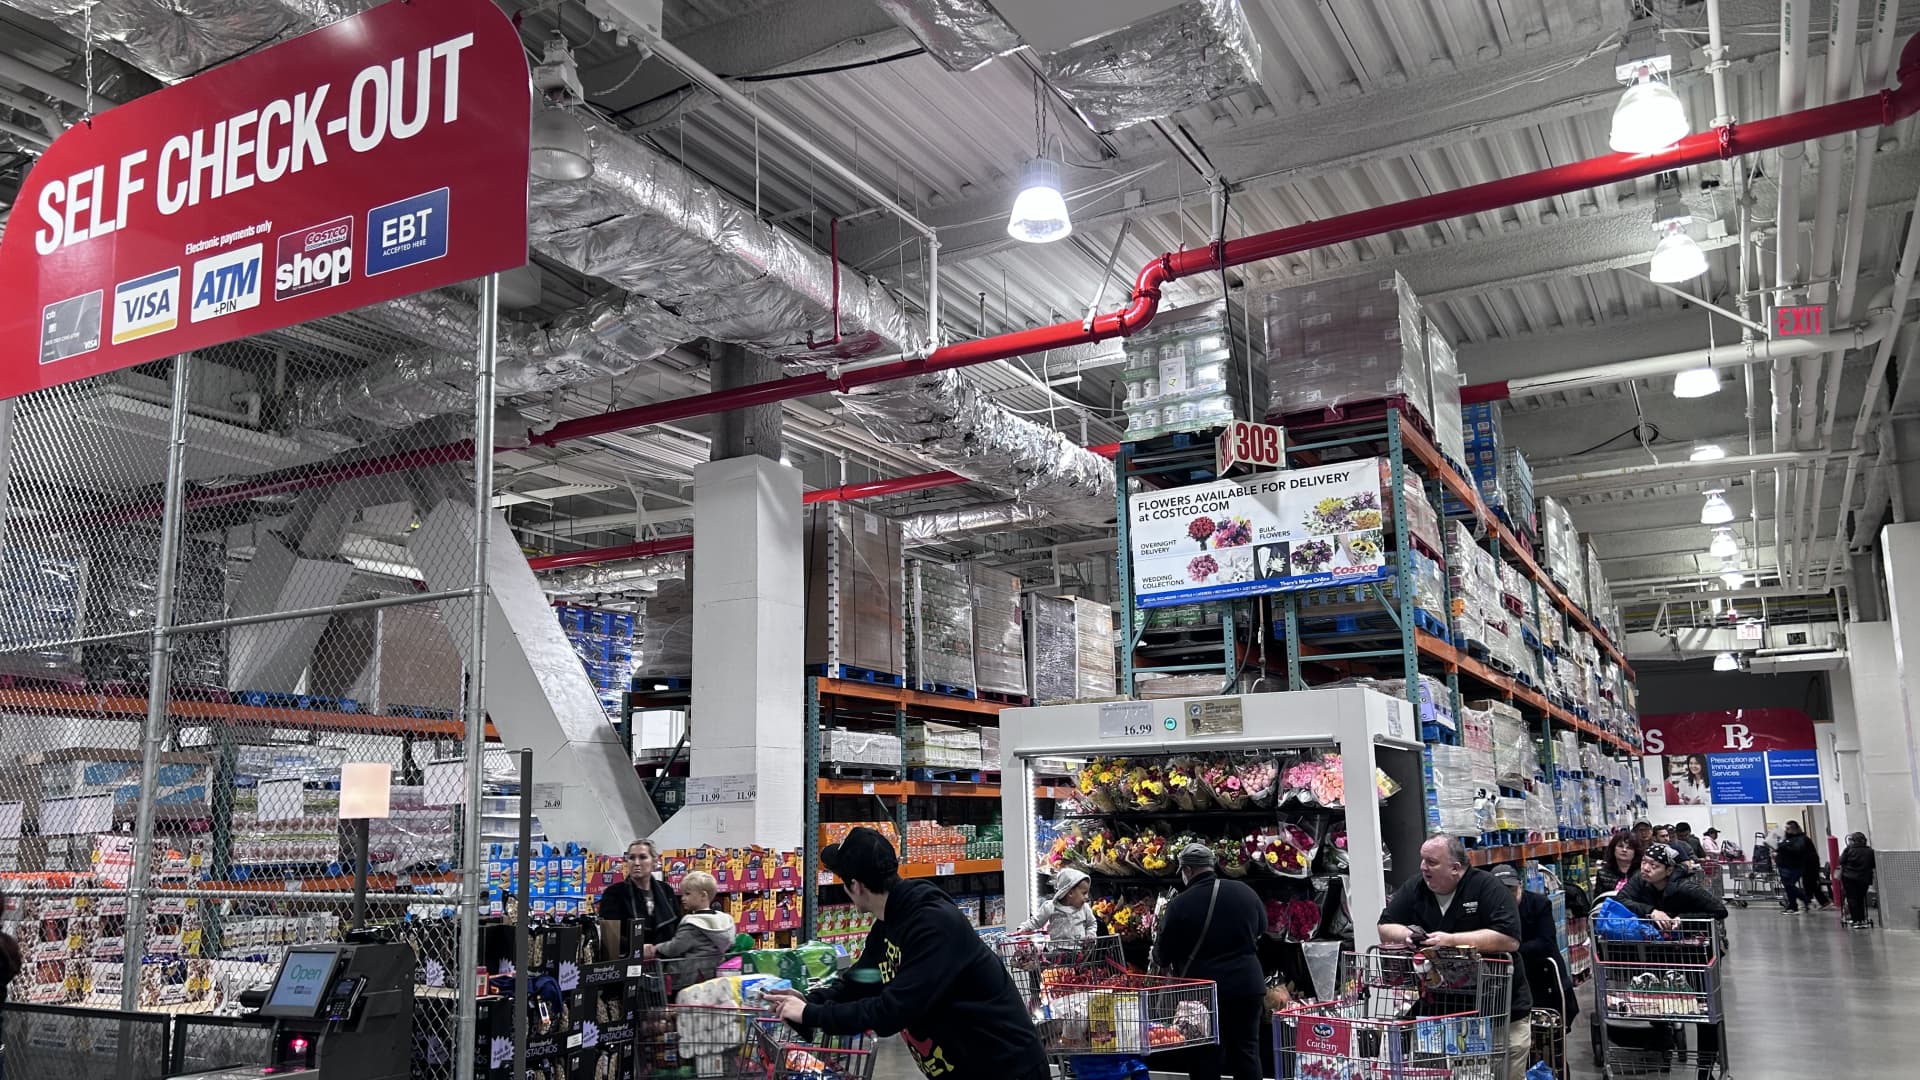 Costco (COST) shares dip despite earnings beat. We see no cause for concern